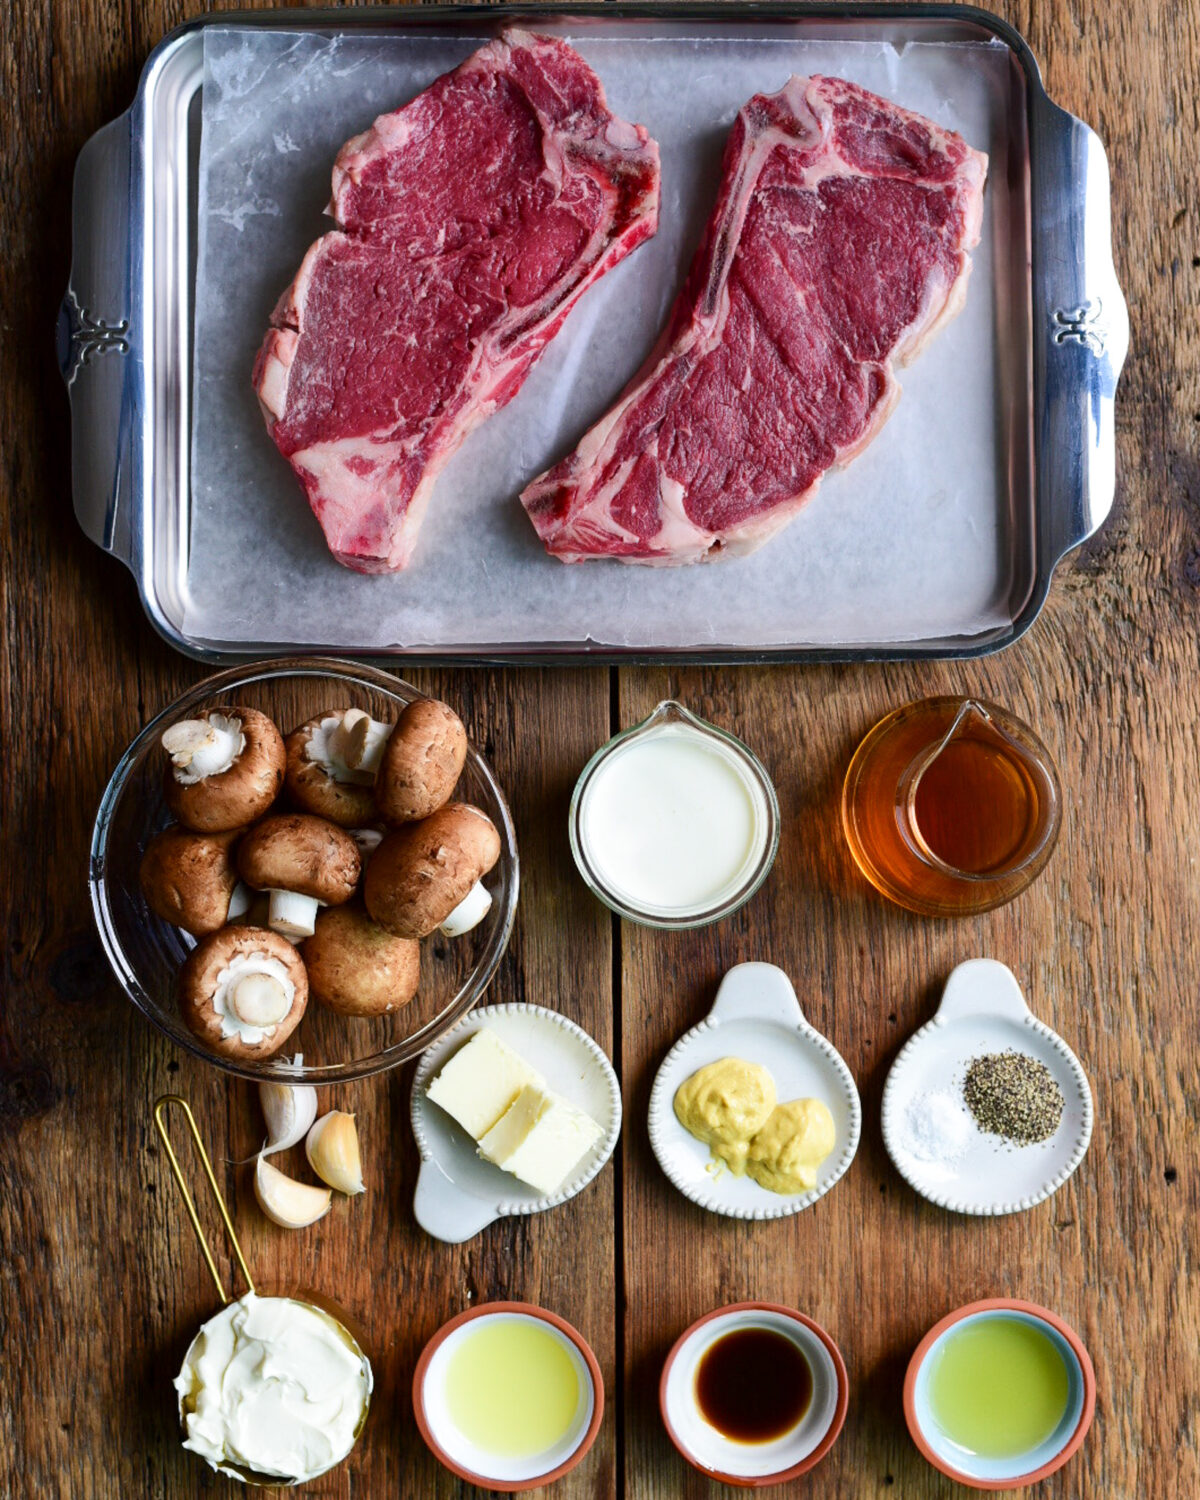 Ingredients laid out for a grilled steaks with mushroom sauce recipe.